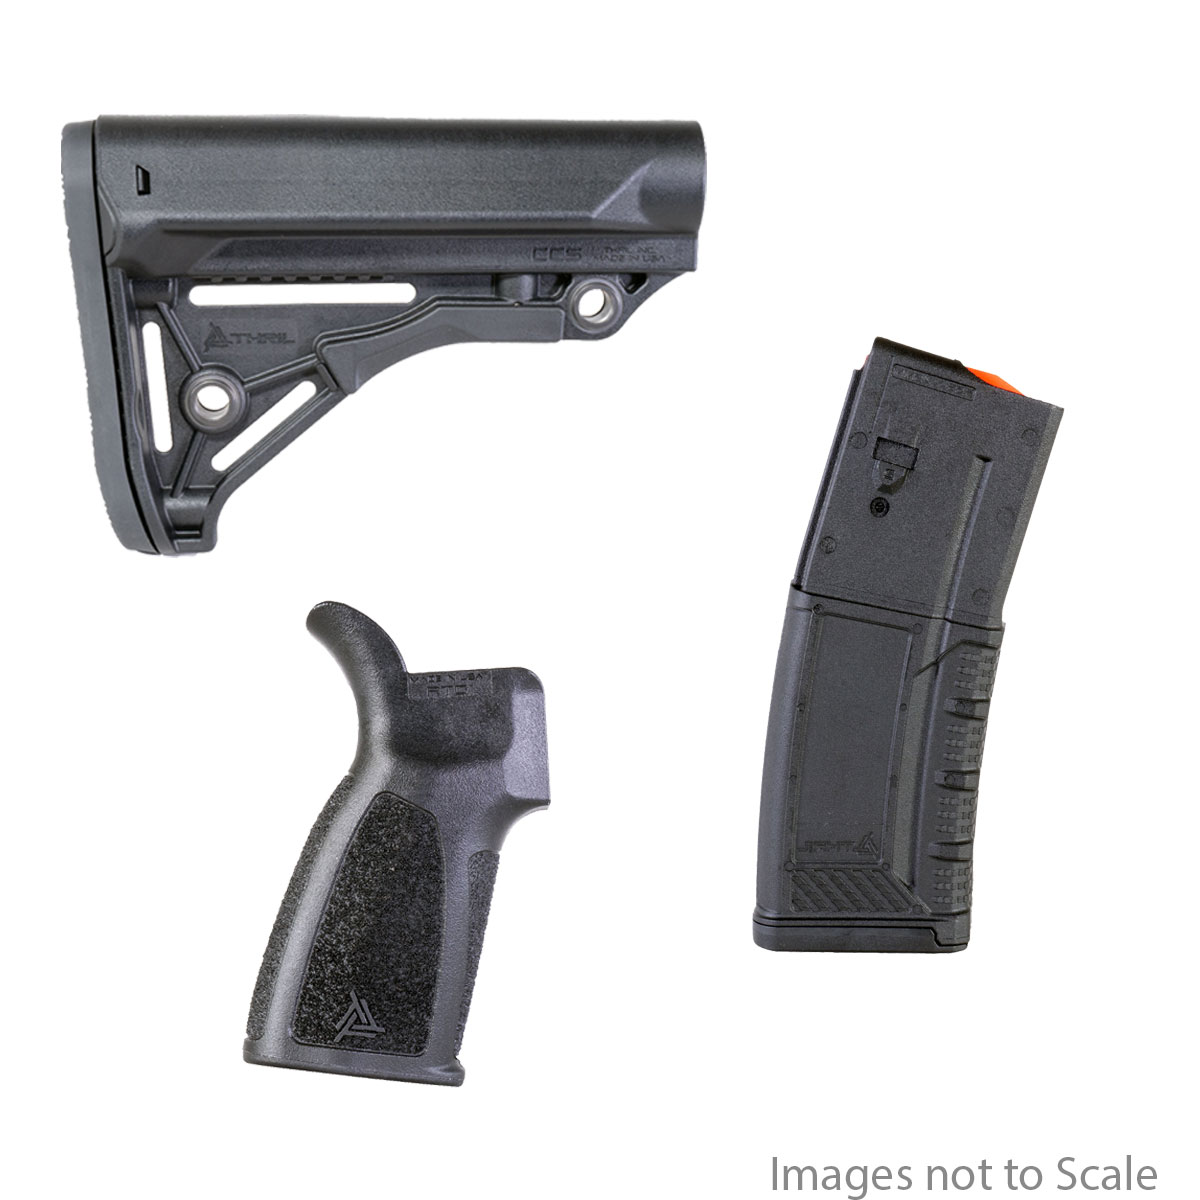 Furniture Kit: Thril THRIL Combat Competition Stock + Thril Rugged Tactical Grip 19.5 degree angle  + Thril PMX AR-15 .223 / 5.56 30-Round Magazine